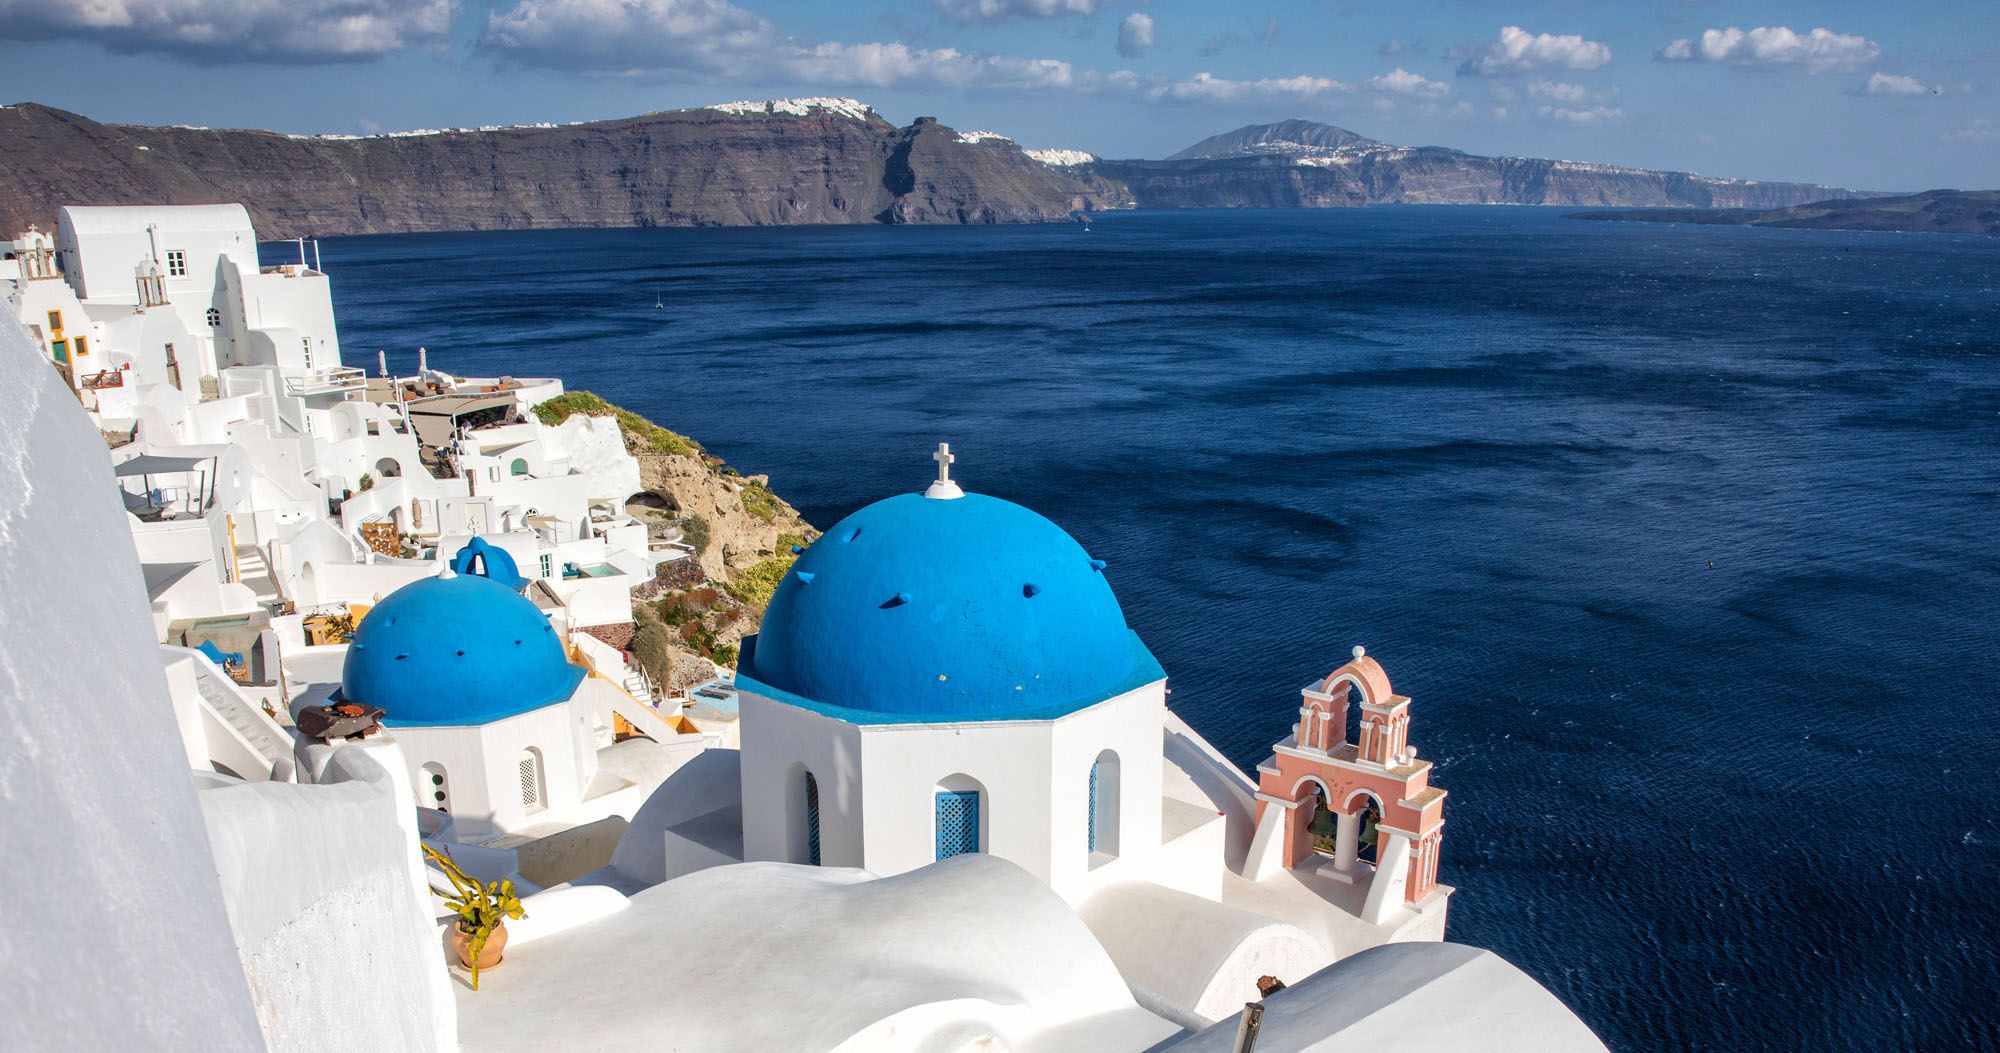 Featured image for “Santorini Itinerary: How to Spend 1, 2, or 3 Days in Santorini”